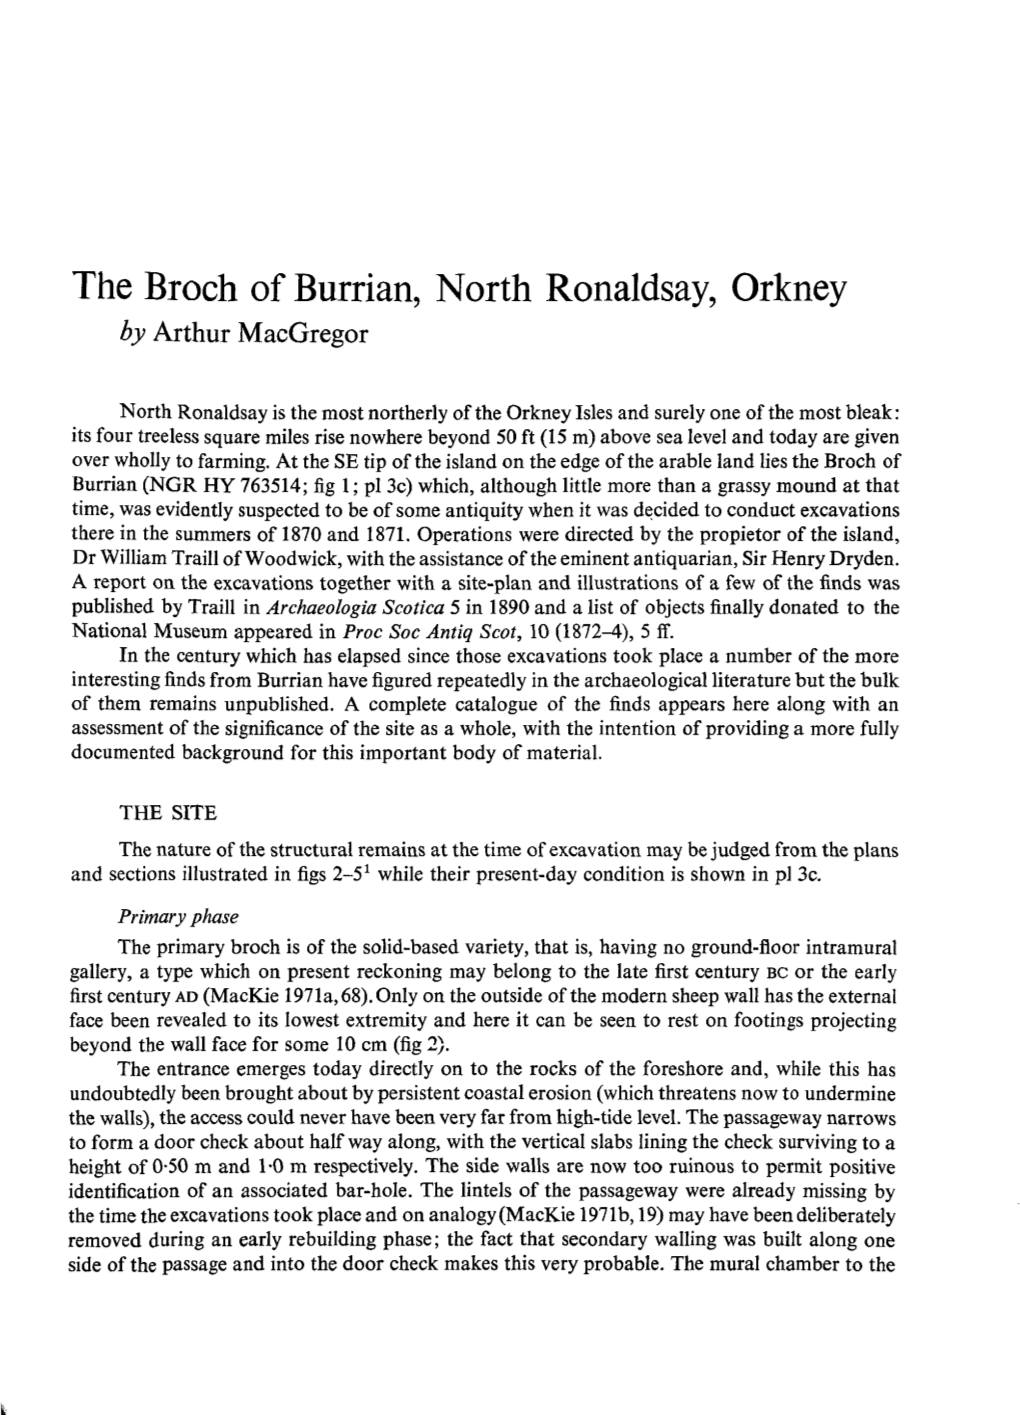 The Broch of Burrian, North Ronaldsay, Orkney by Arthur Macgregor